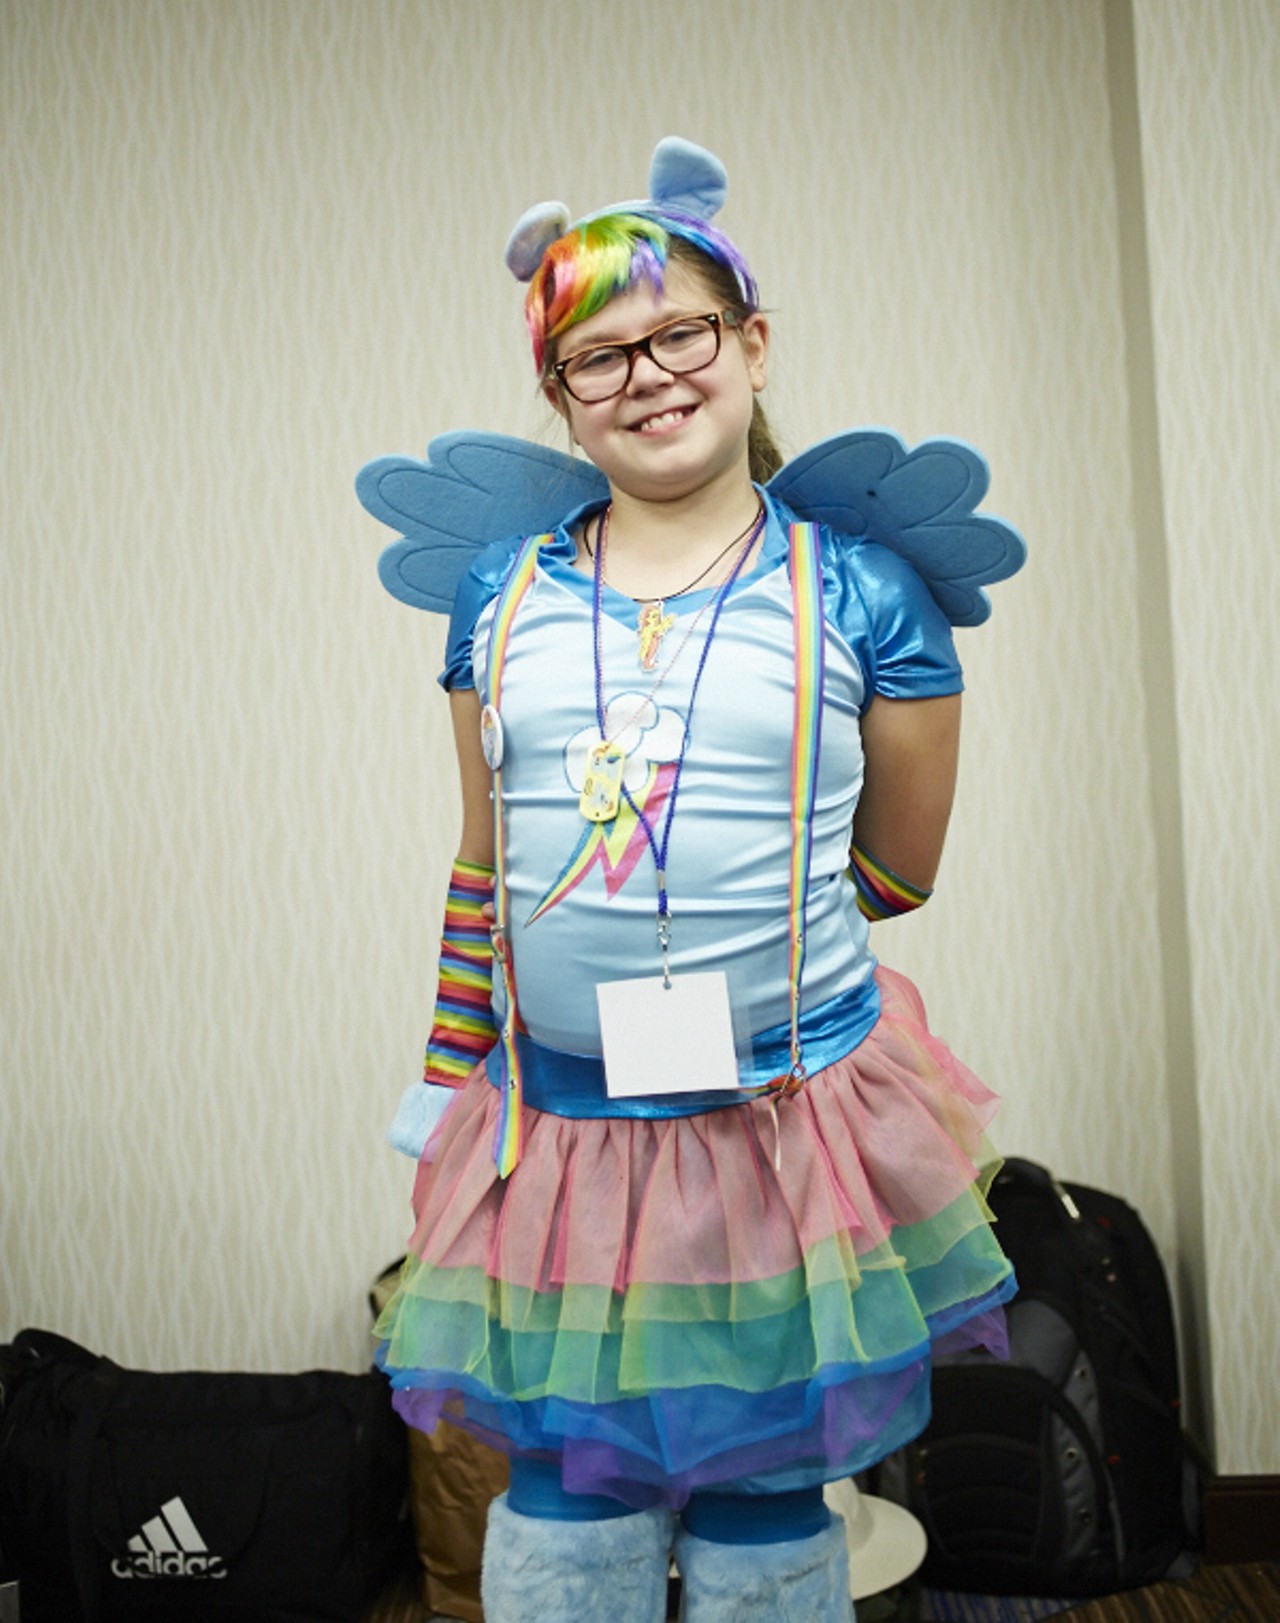 The Bronies of St. Louis' 'My Little Pony' Convention